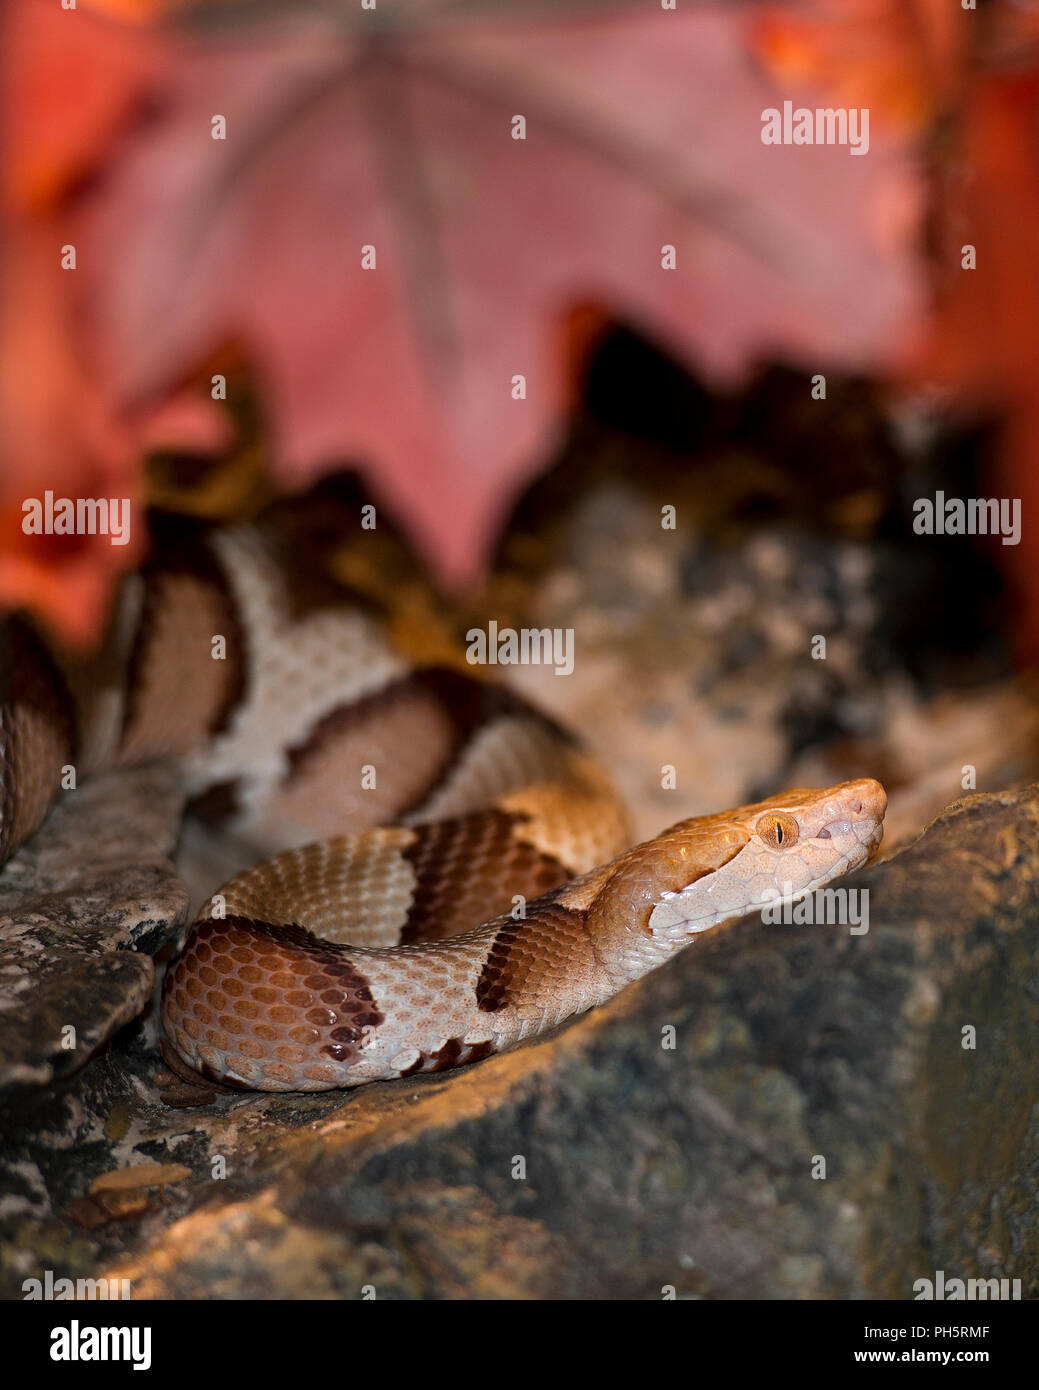 Snake in its surrounding and environment. Stock Photo